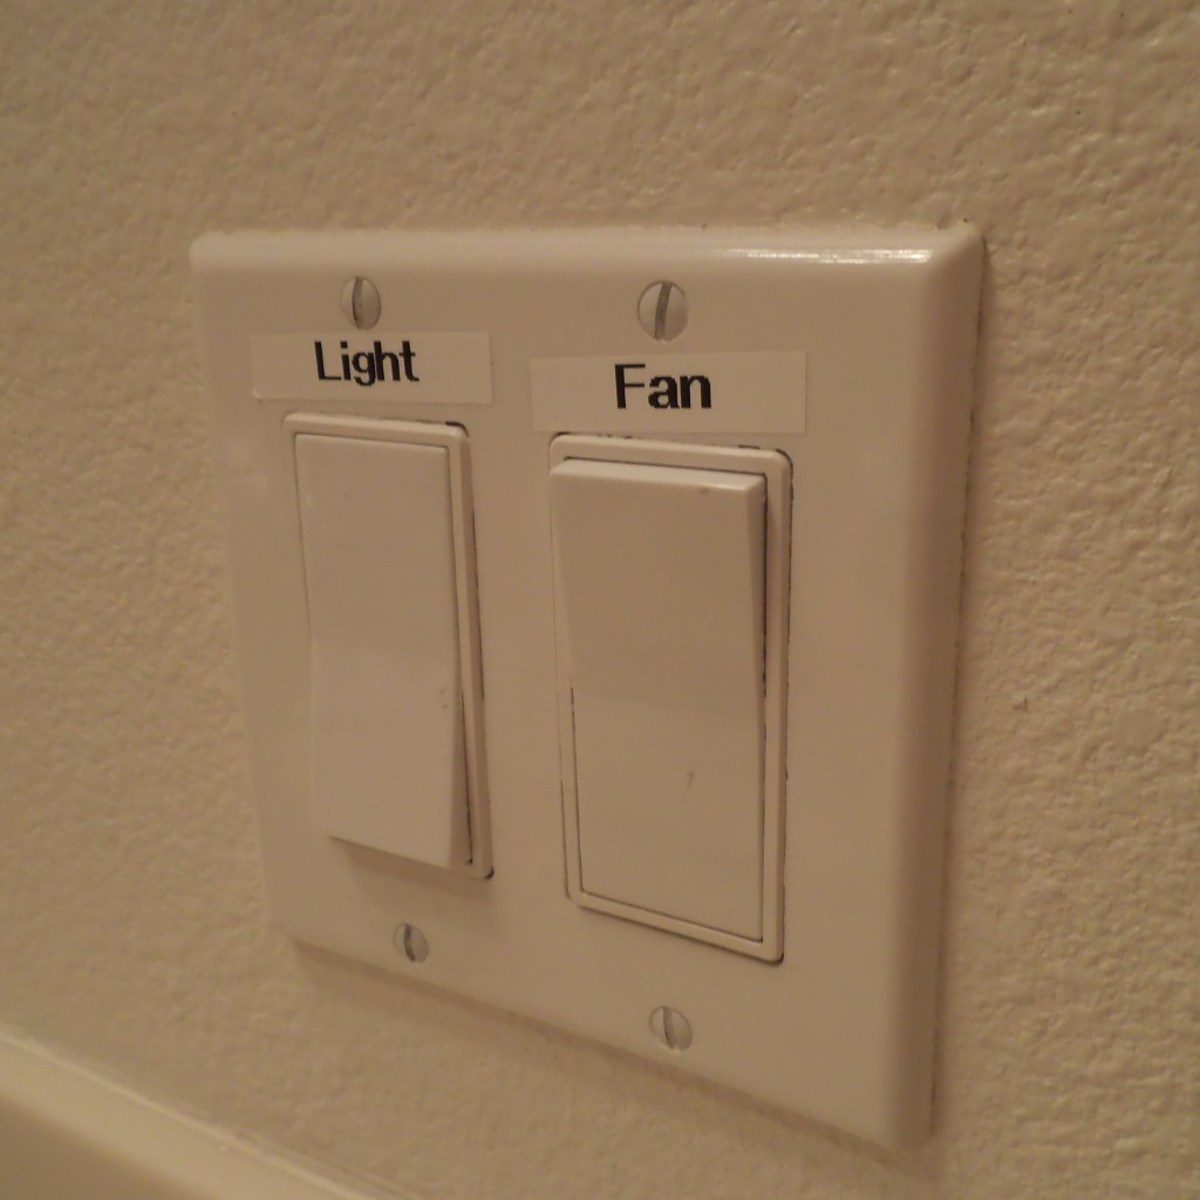 Label confusing switches.